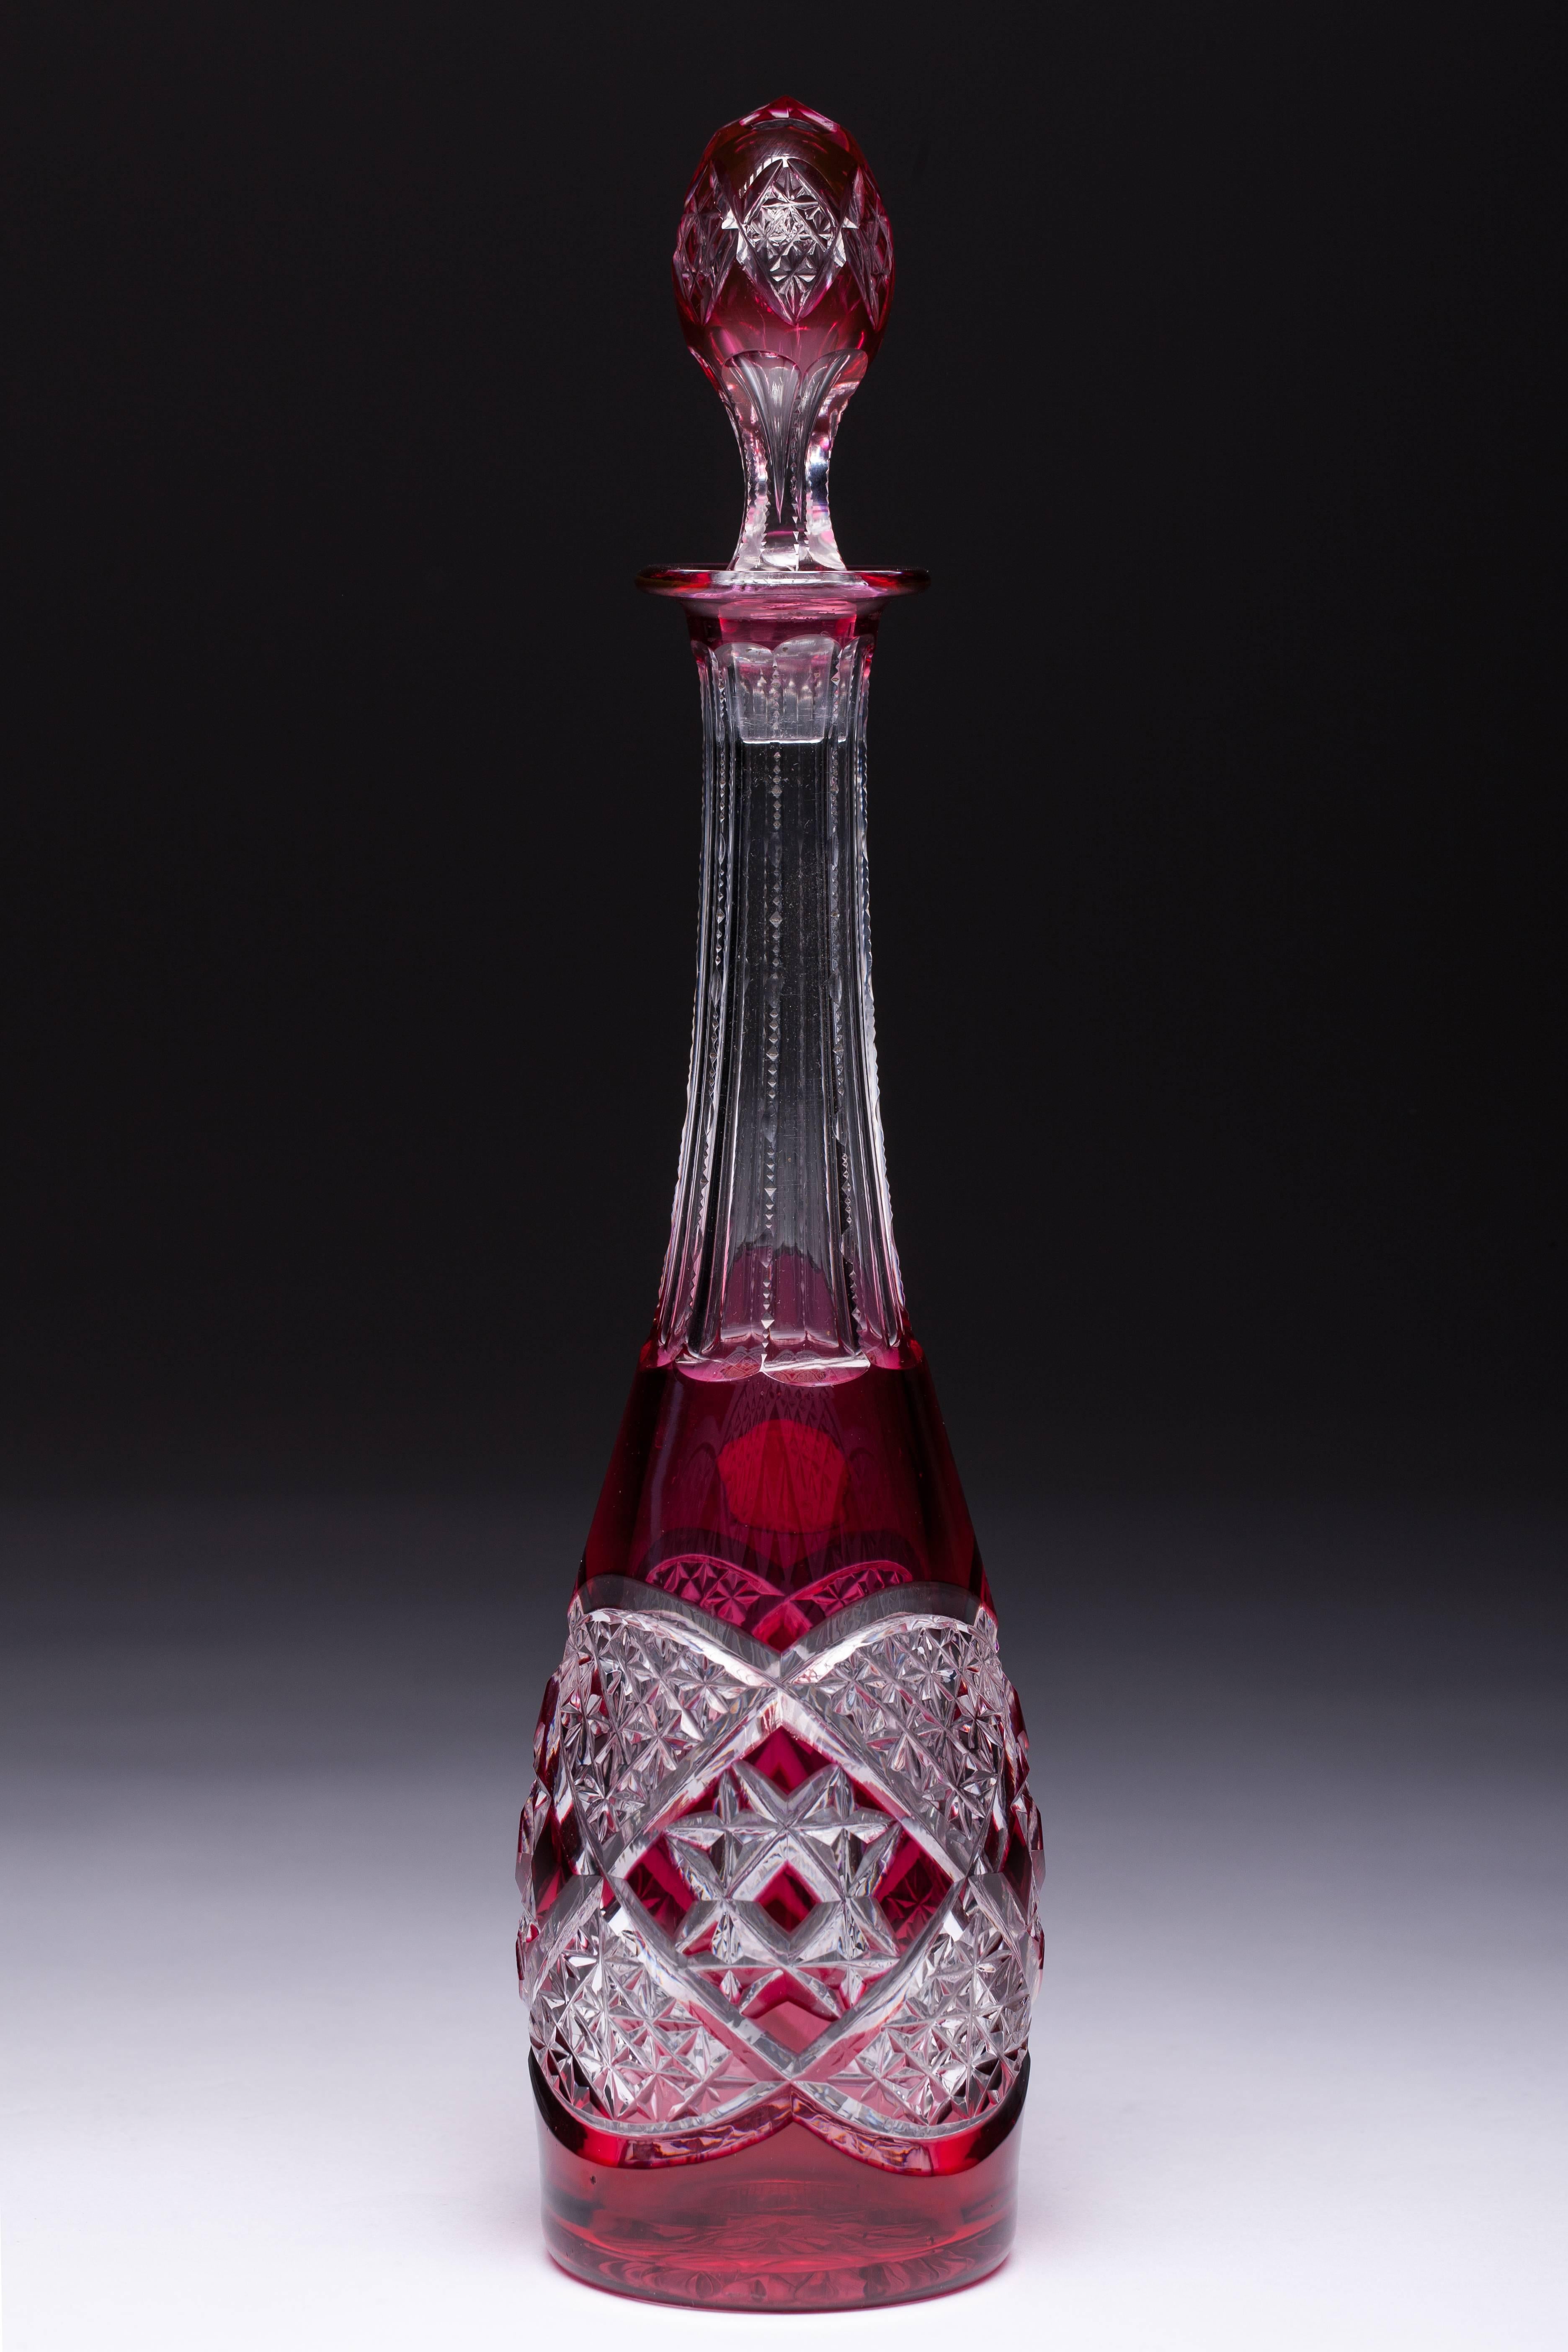 High decanter, red-white, hand cut taillé riche Val Saint Lambert, signed model Verrept, Belgium, 20th century. Val St Lambert is a Belgian crystal glassware manufacturer, founded in 1826 and based in Seraing. It is the official glassware supplier